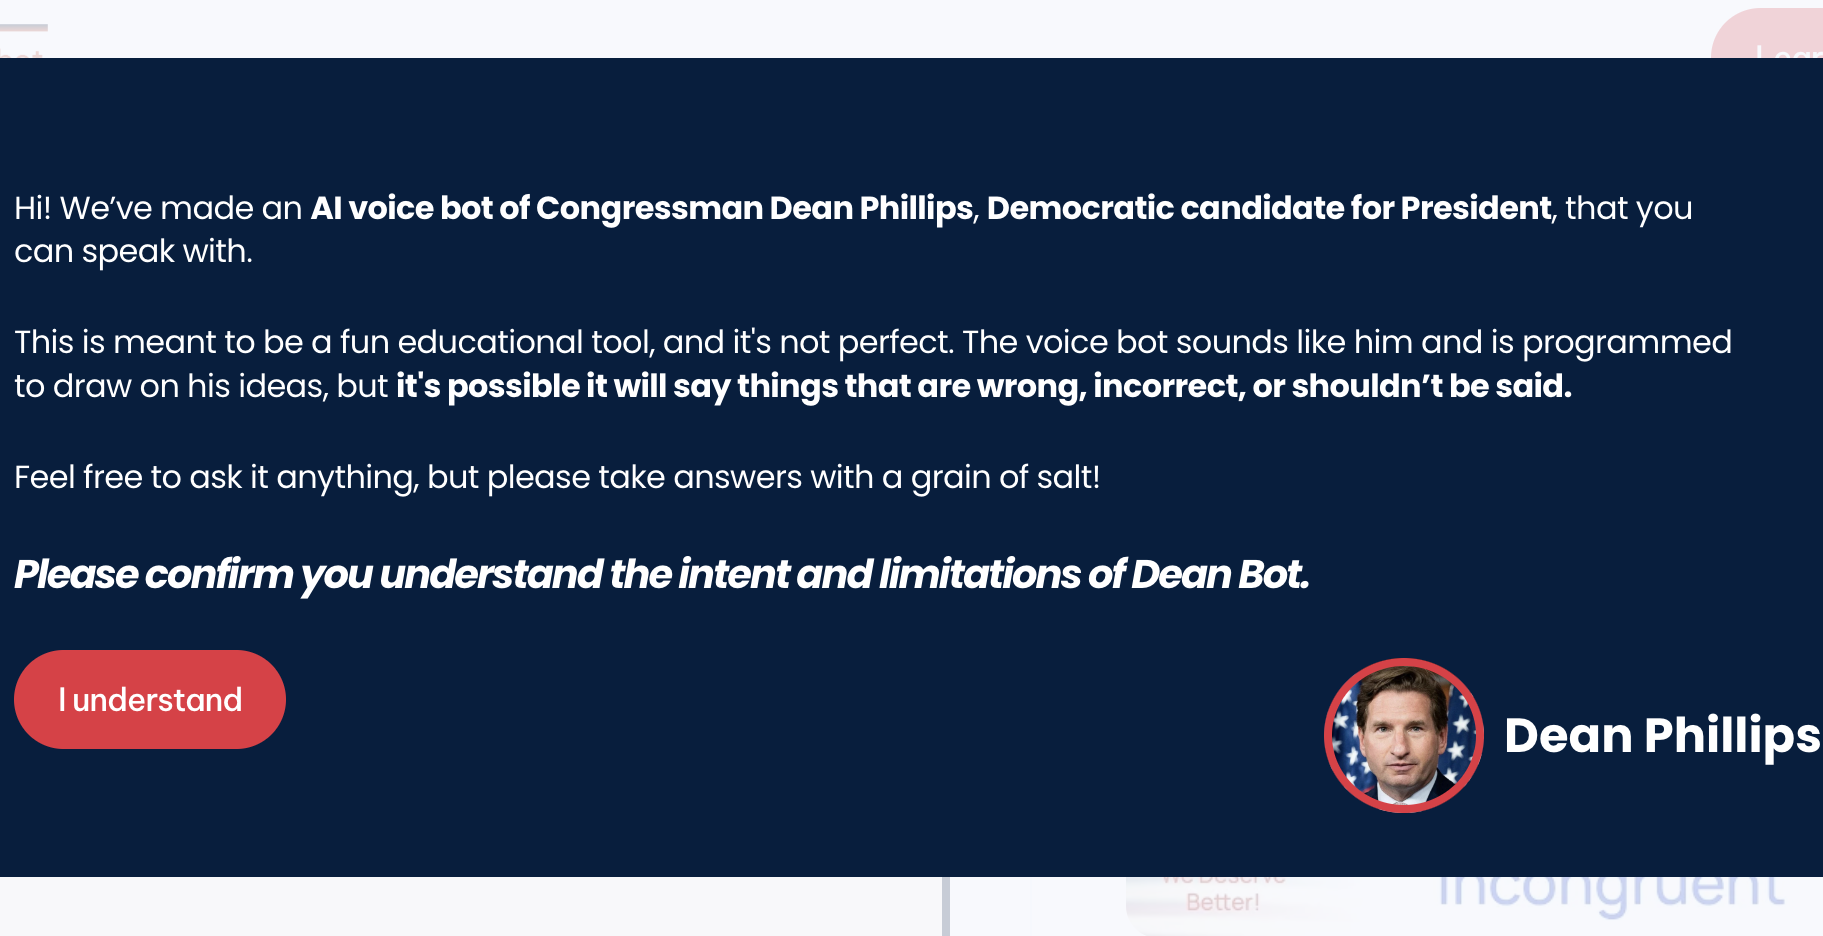 A disclaimer for the chatbot of Congressman Dean Phillips